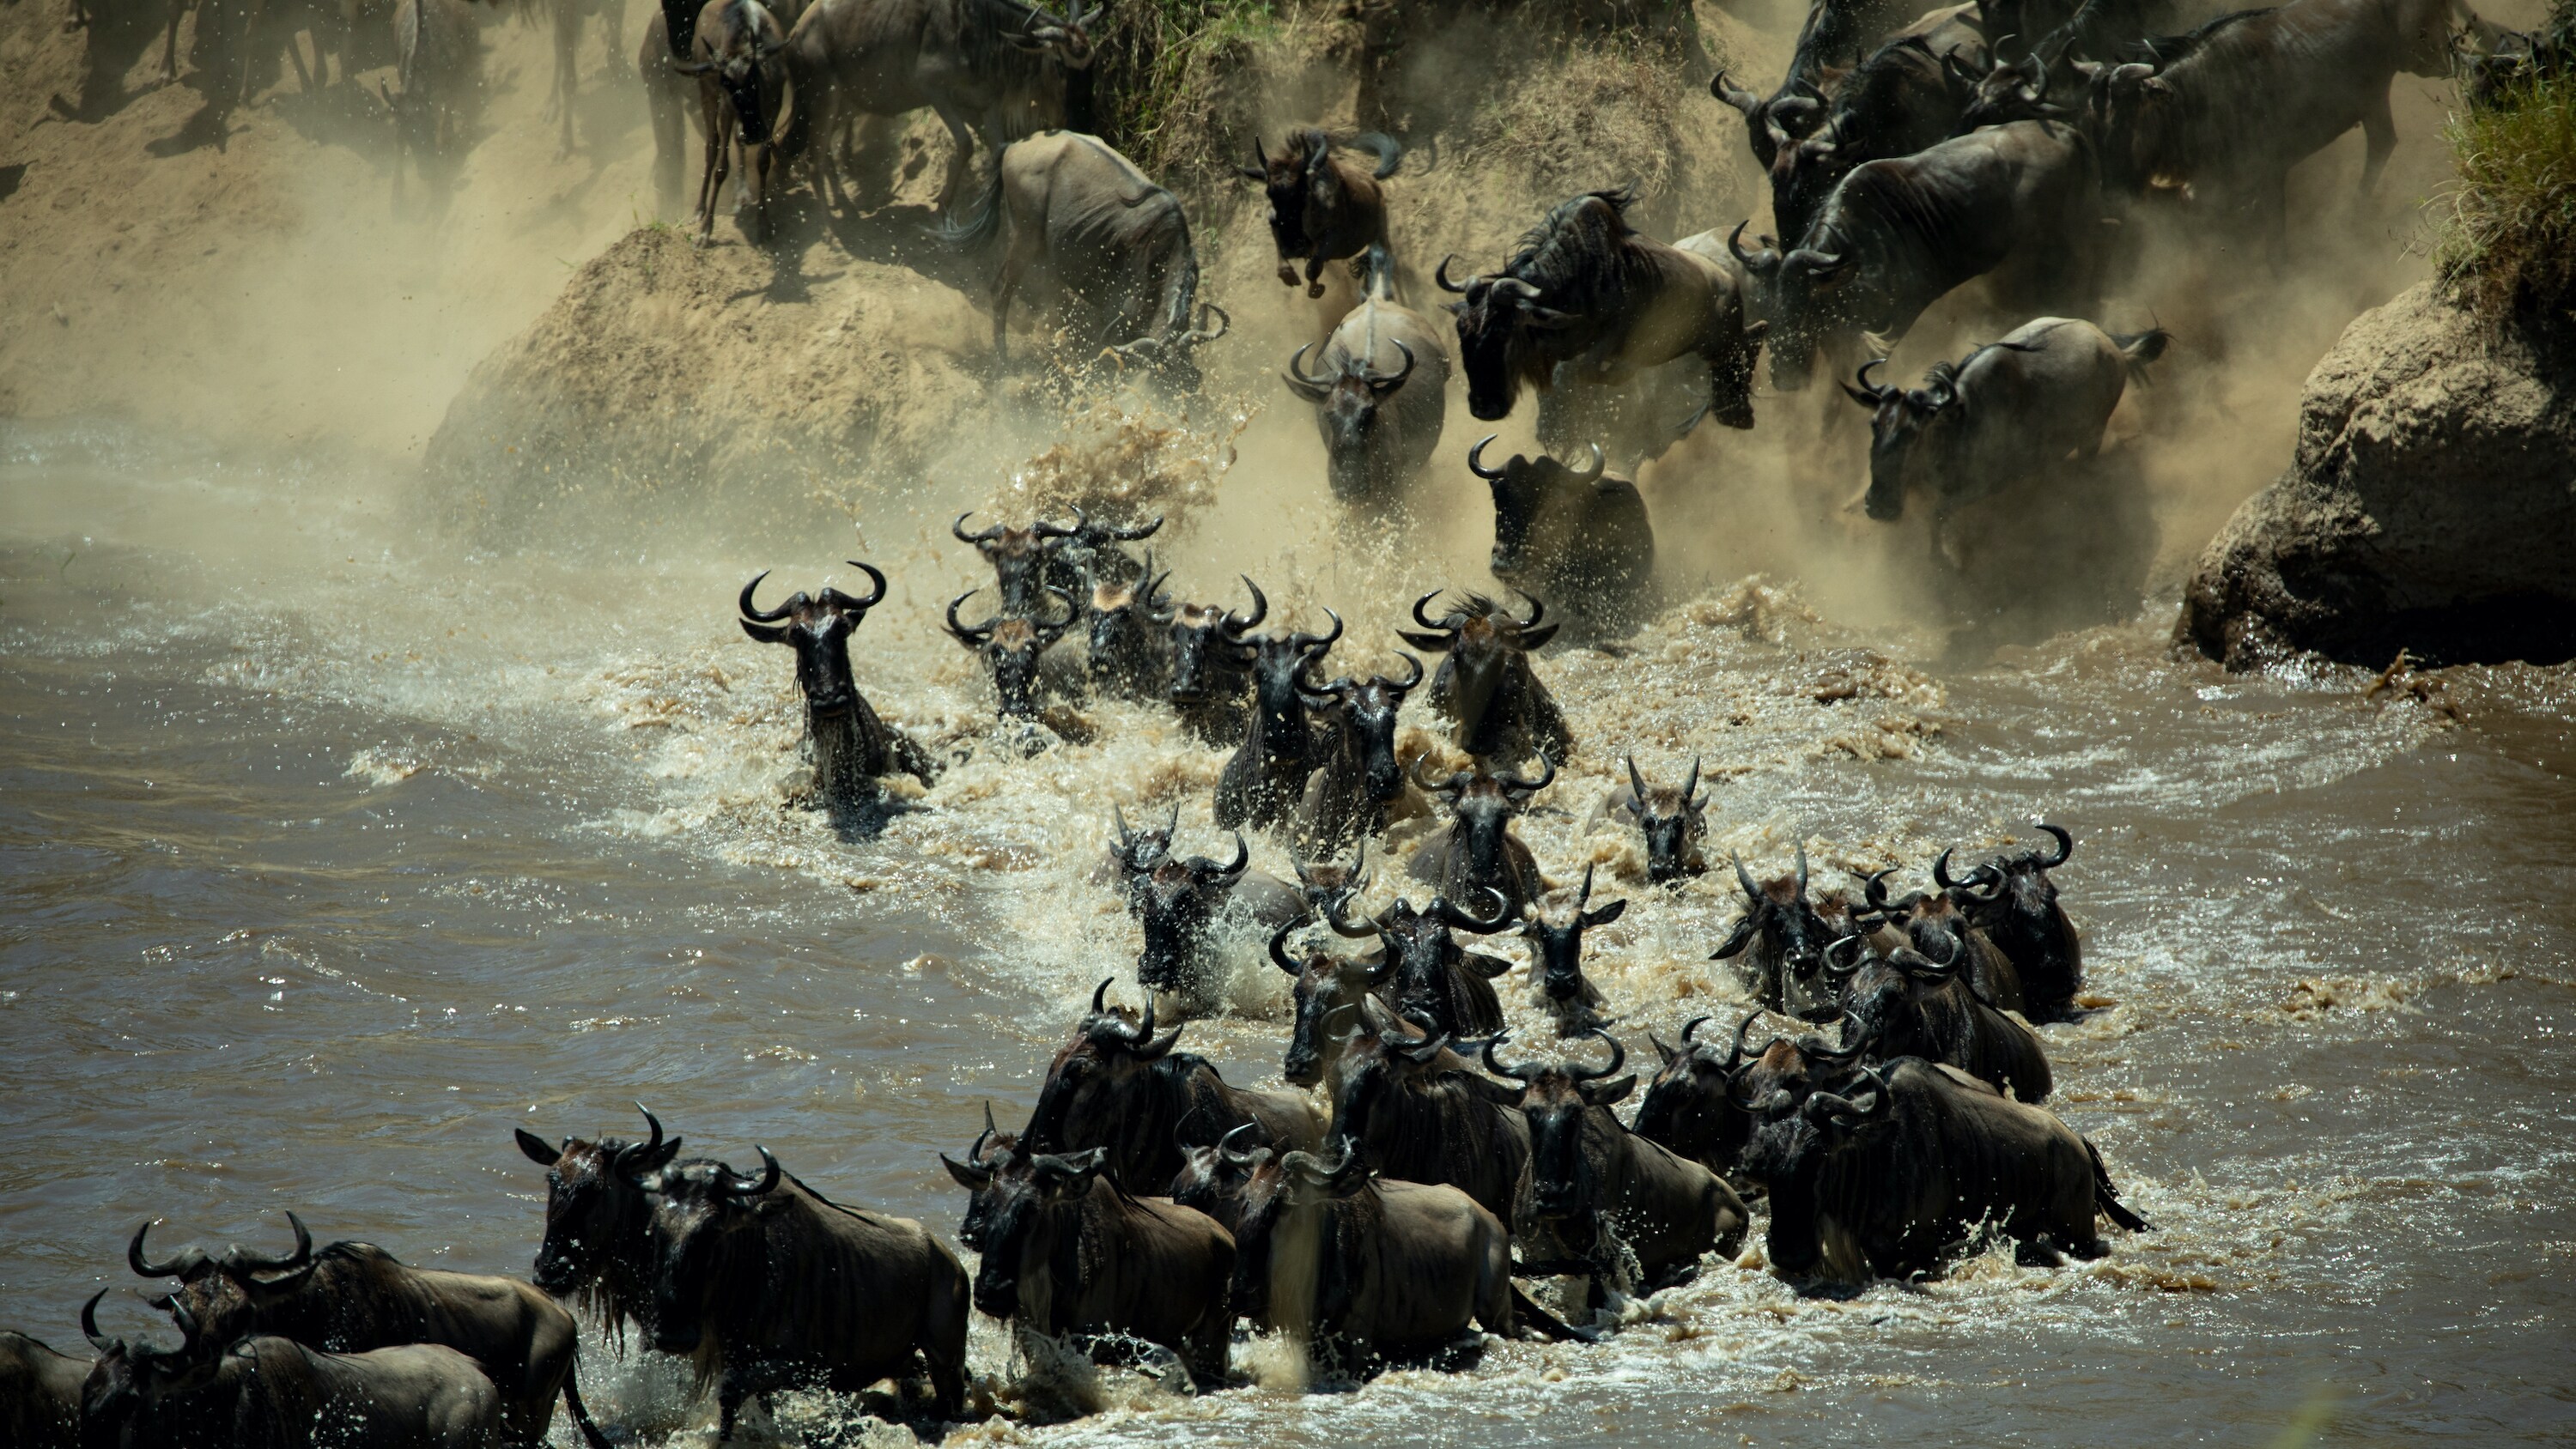 Migrations in the Serengeti.  (National Geographic for Disney+/Kyle Christy)